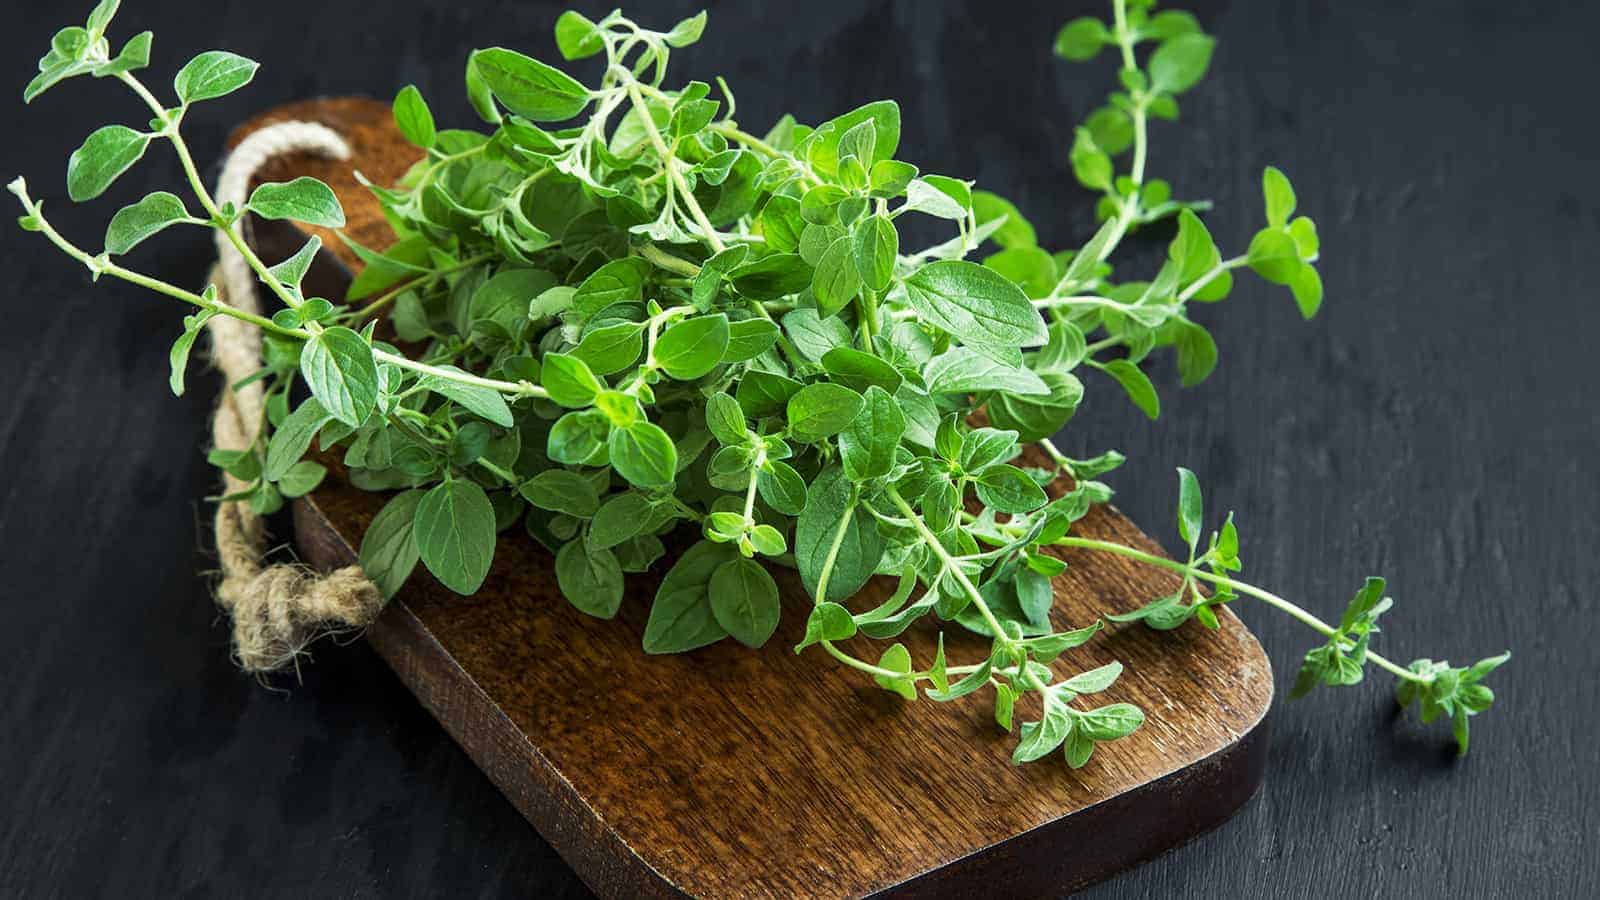 7 Reasons to Eat Oregano, According to Research